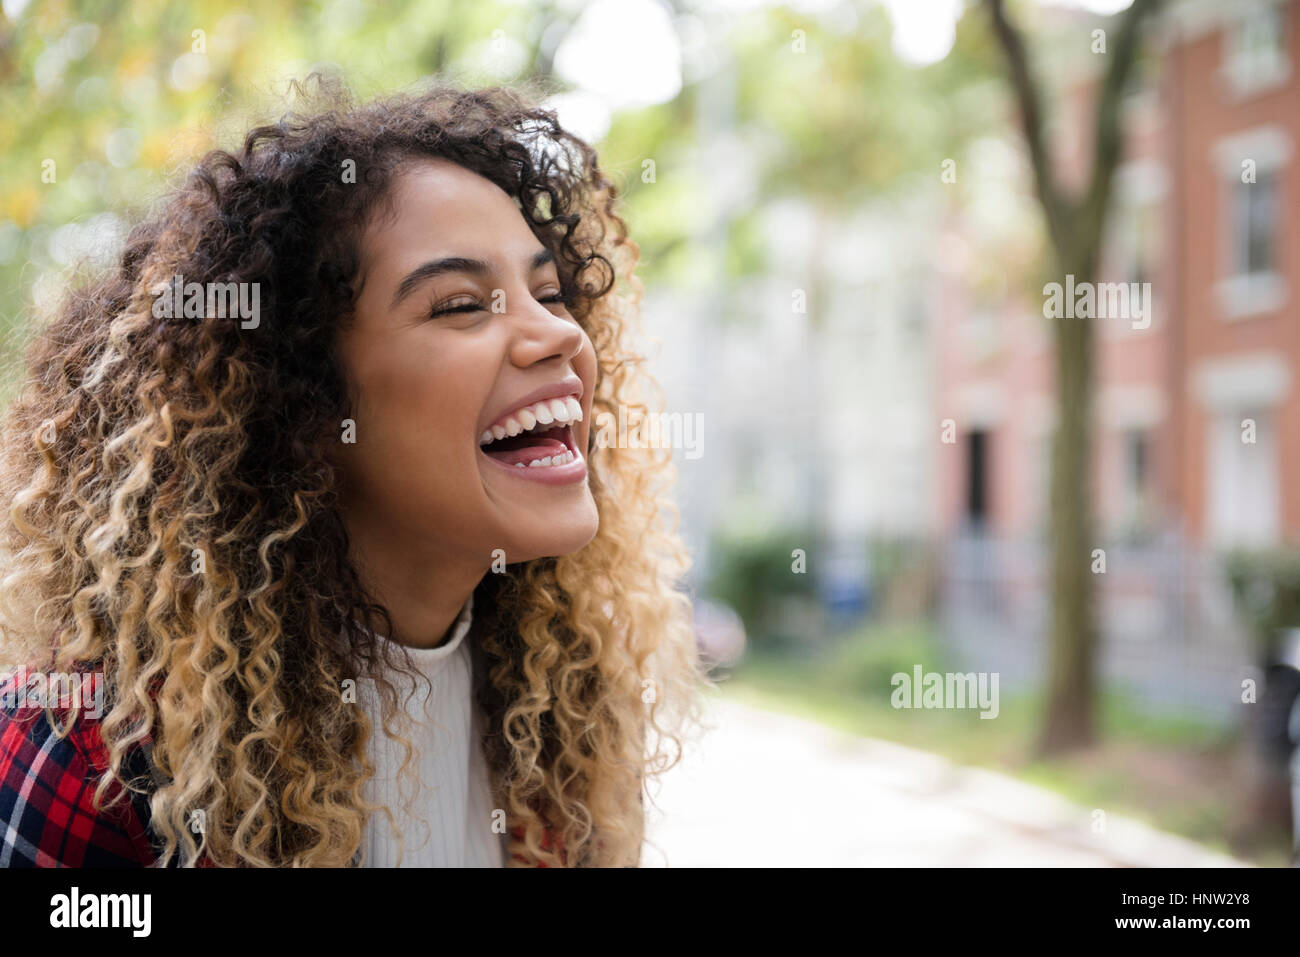 Mixed Race woman laughing in city Stock Photo